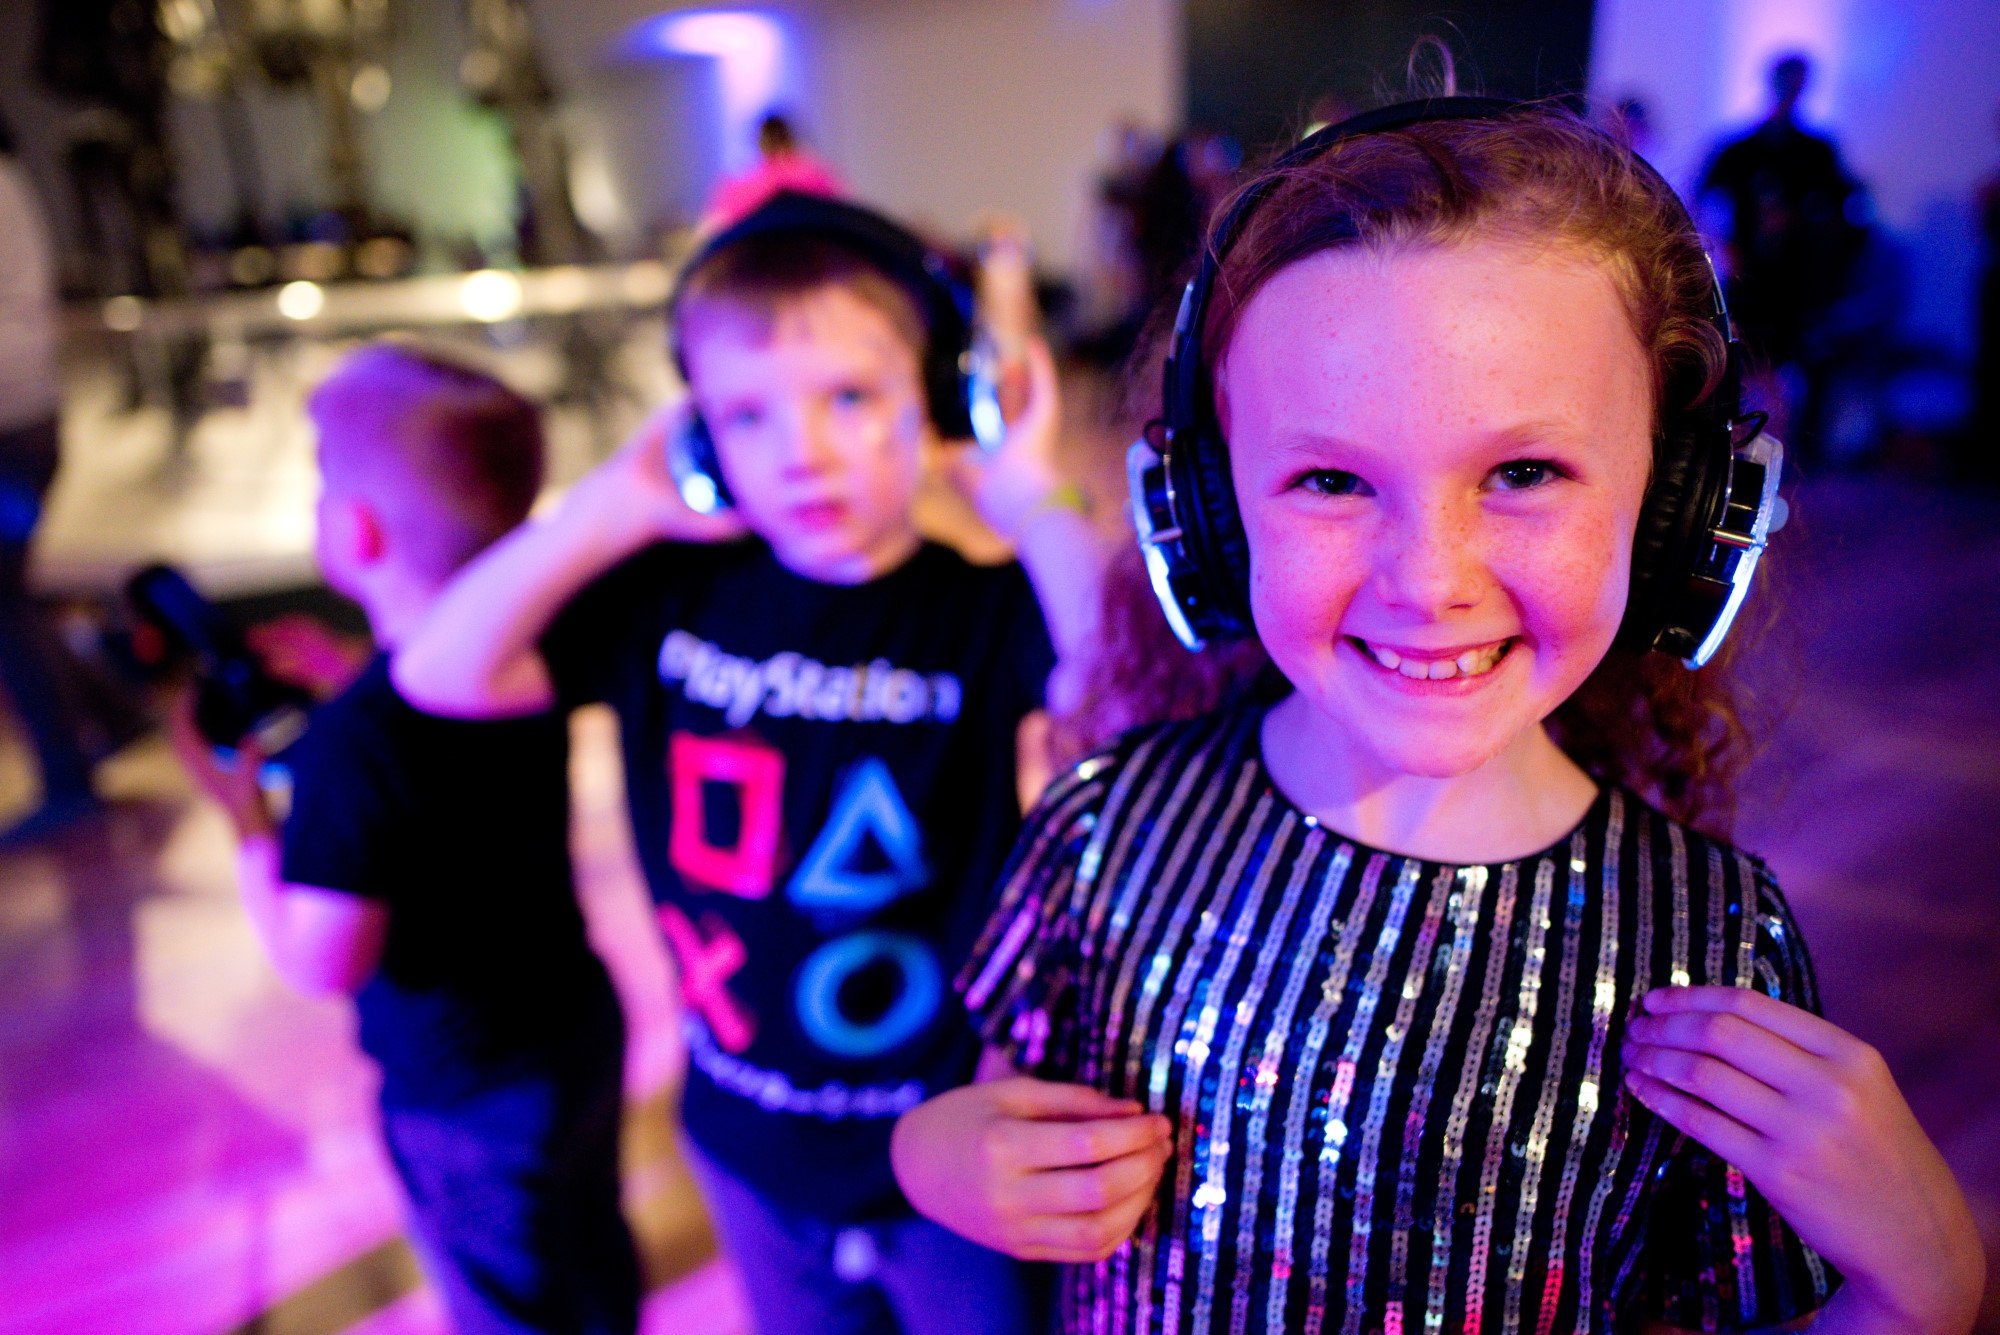 Children enjoy a 'Silent Disco' wearing headphones at the Great North Museum